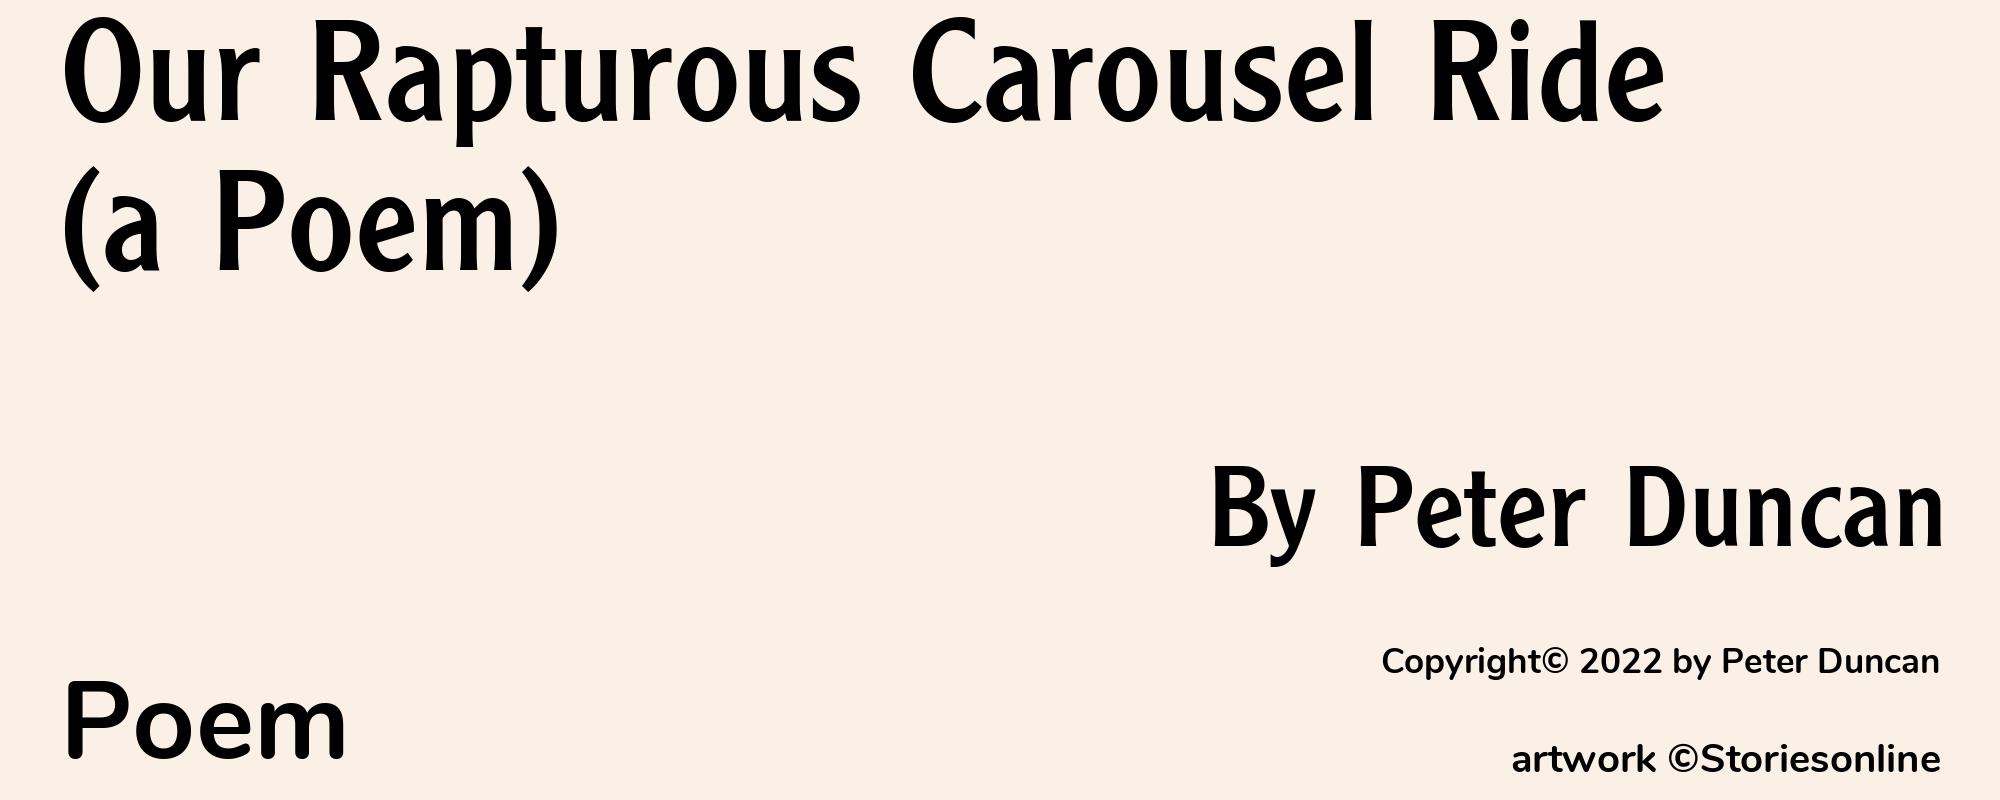 Our Rapturous Carousel Ride (a Poem) - Cover